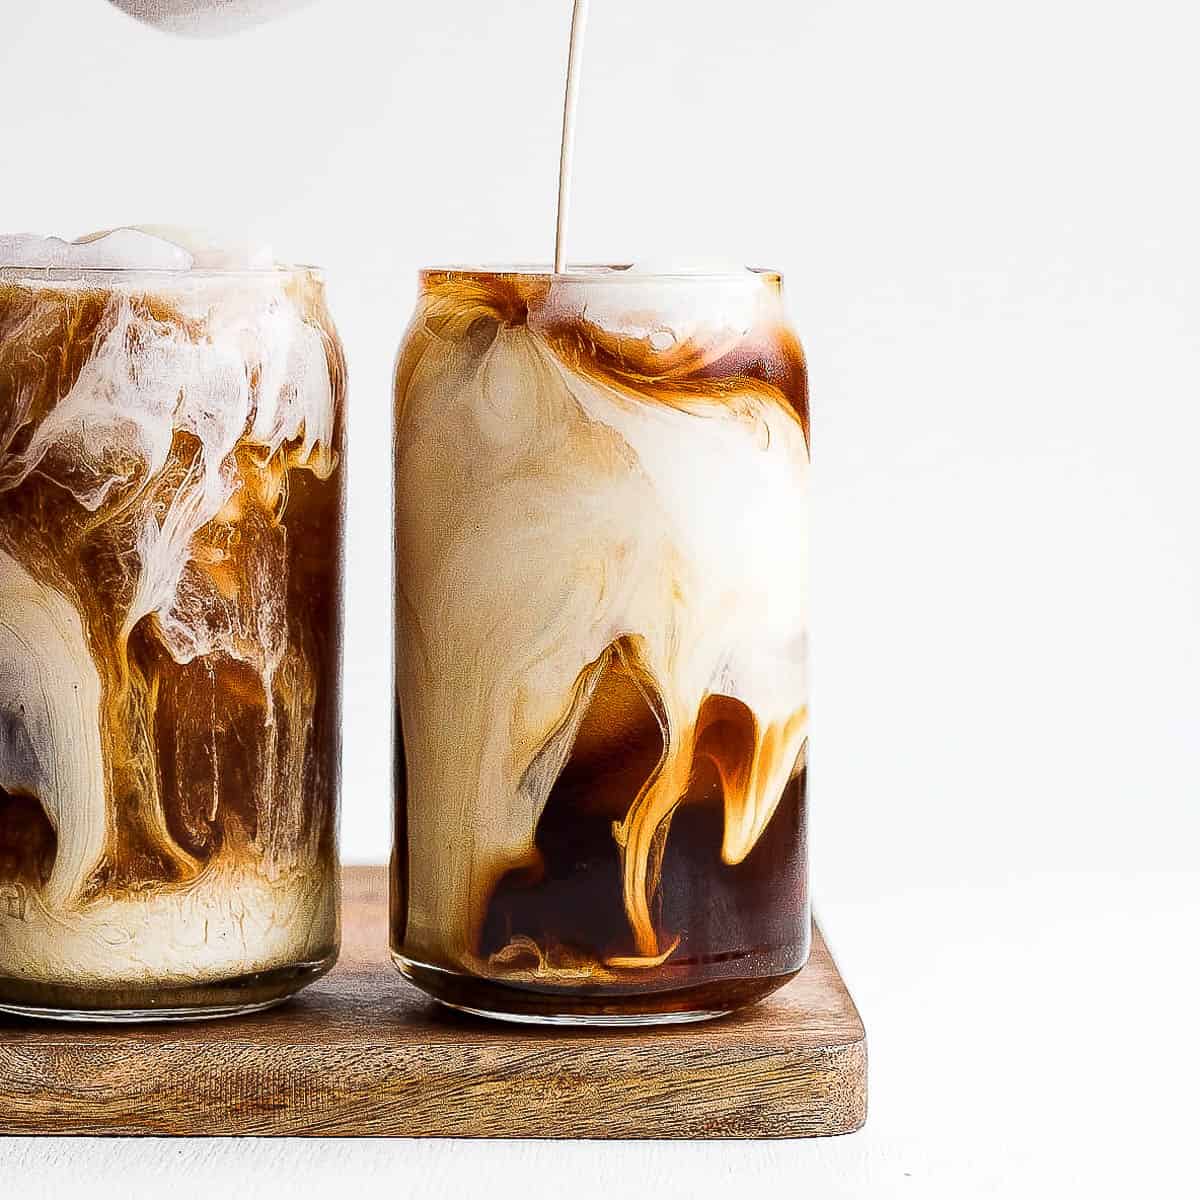 How Long Can You Keep Cold Brew Coffee in the Refrigerator For?